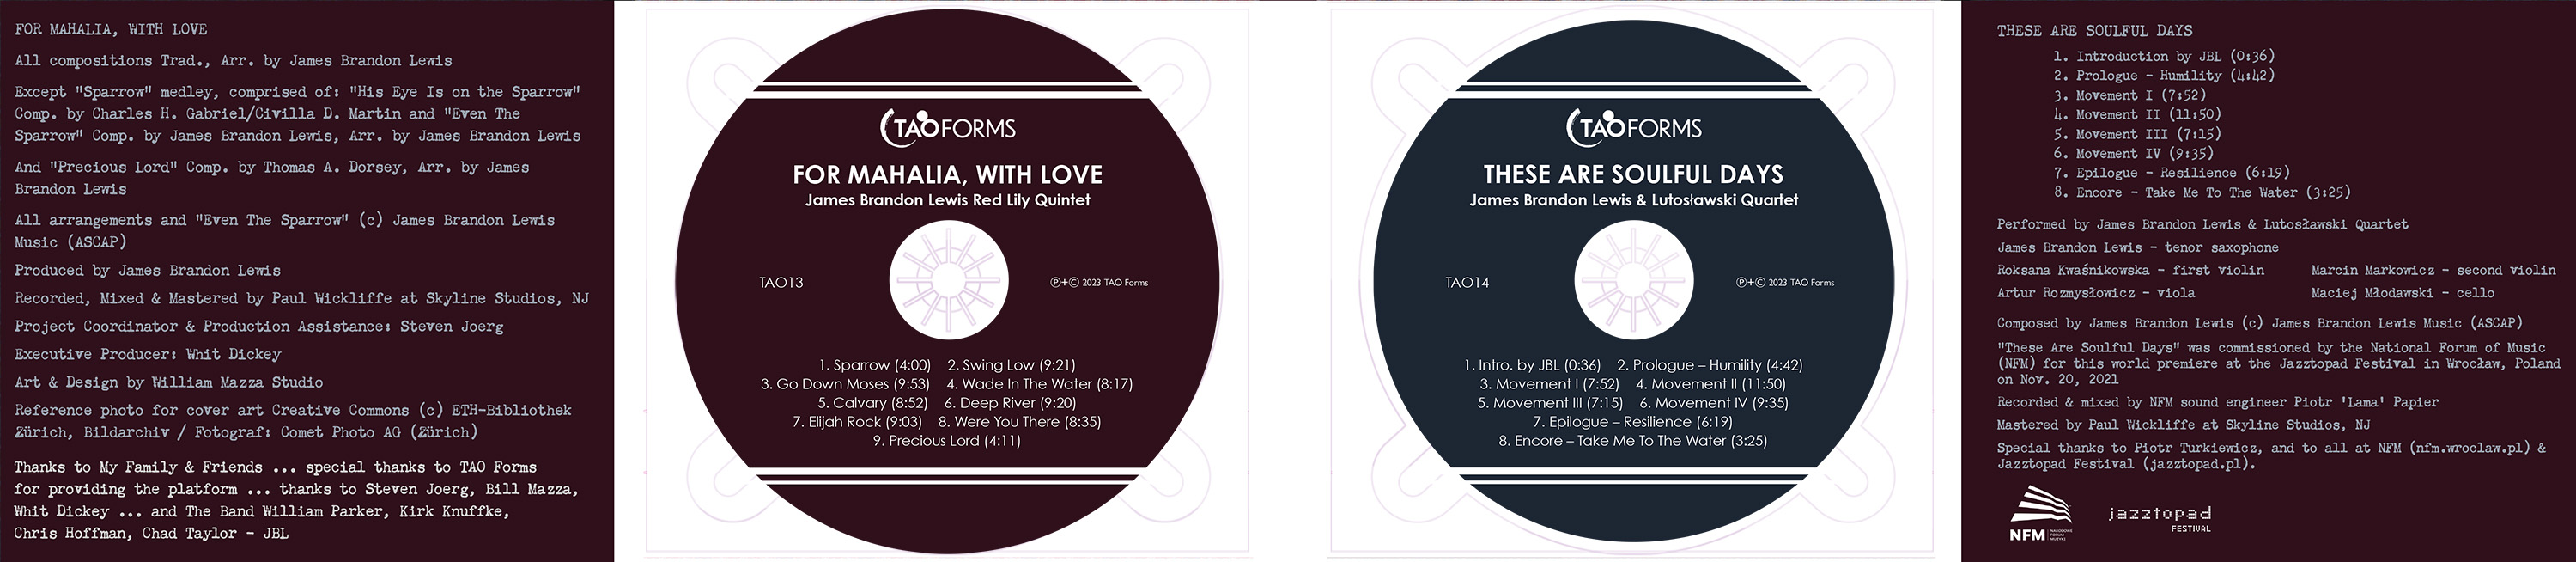 cd cover and inside panels for For Mahalia With Love by James Brandon Lewis Red Lily Quintet